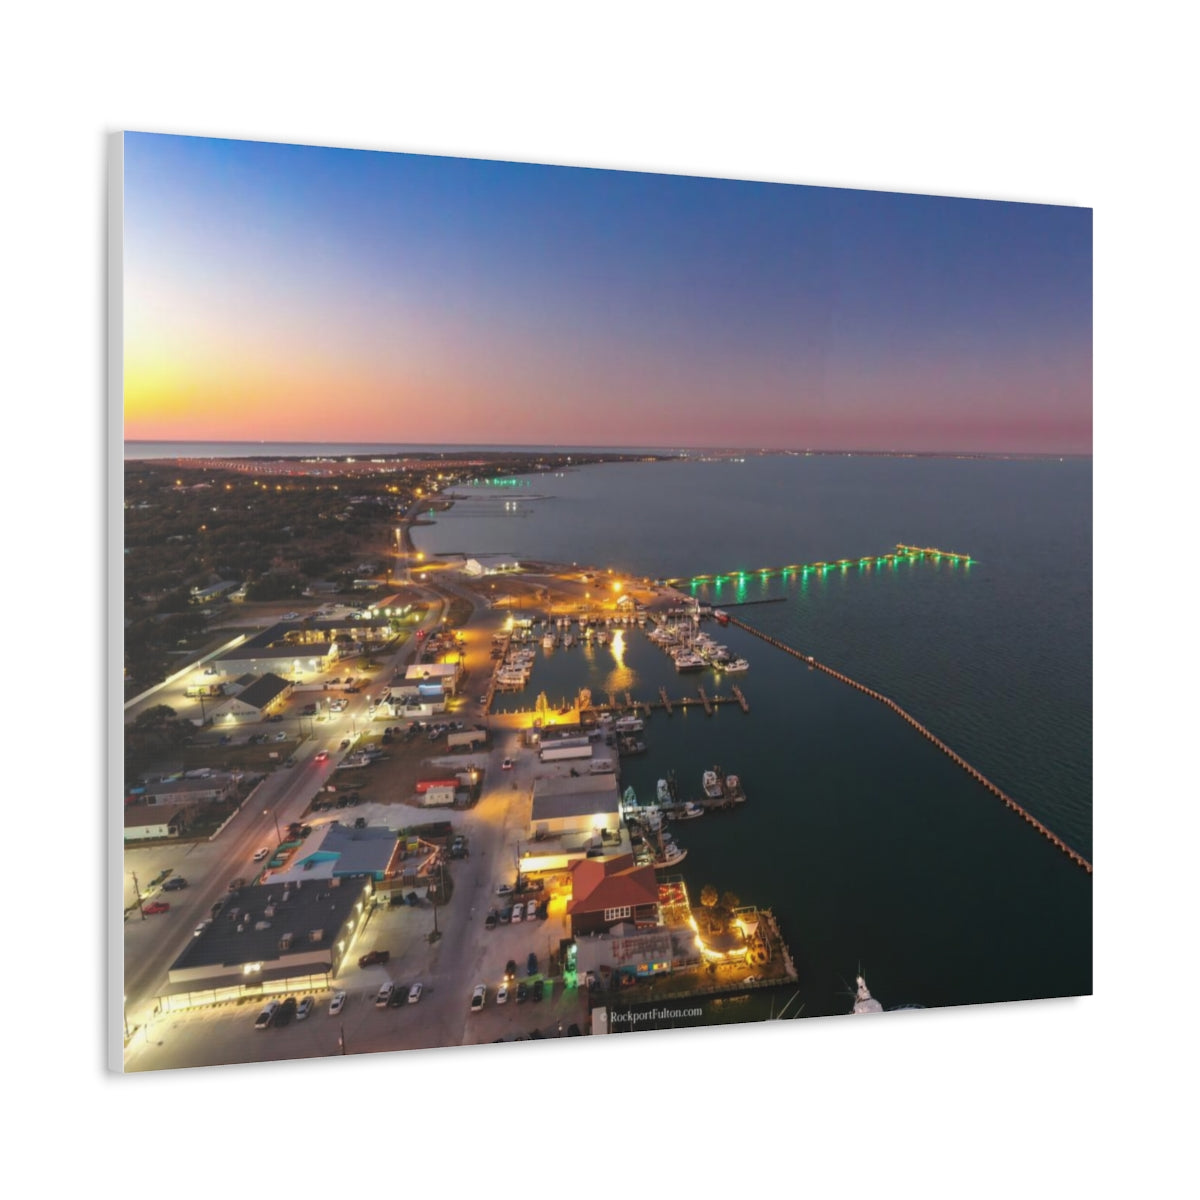 The Town of Fulton Texas Large Canvas Gallery Wrap